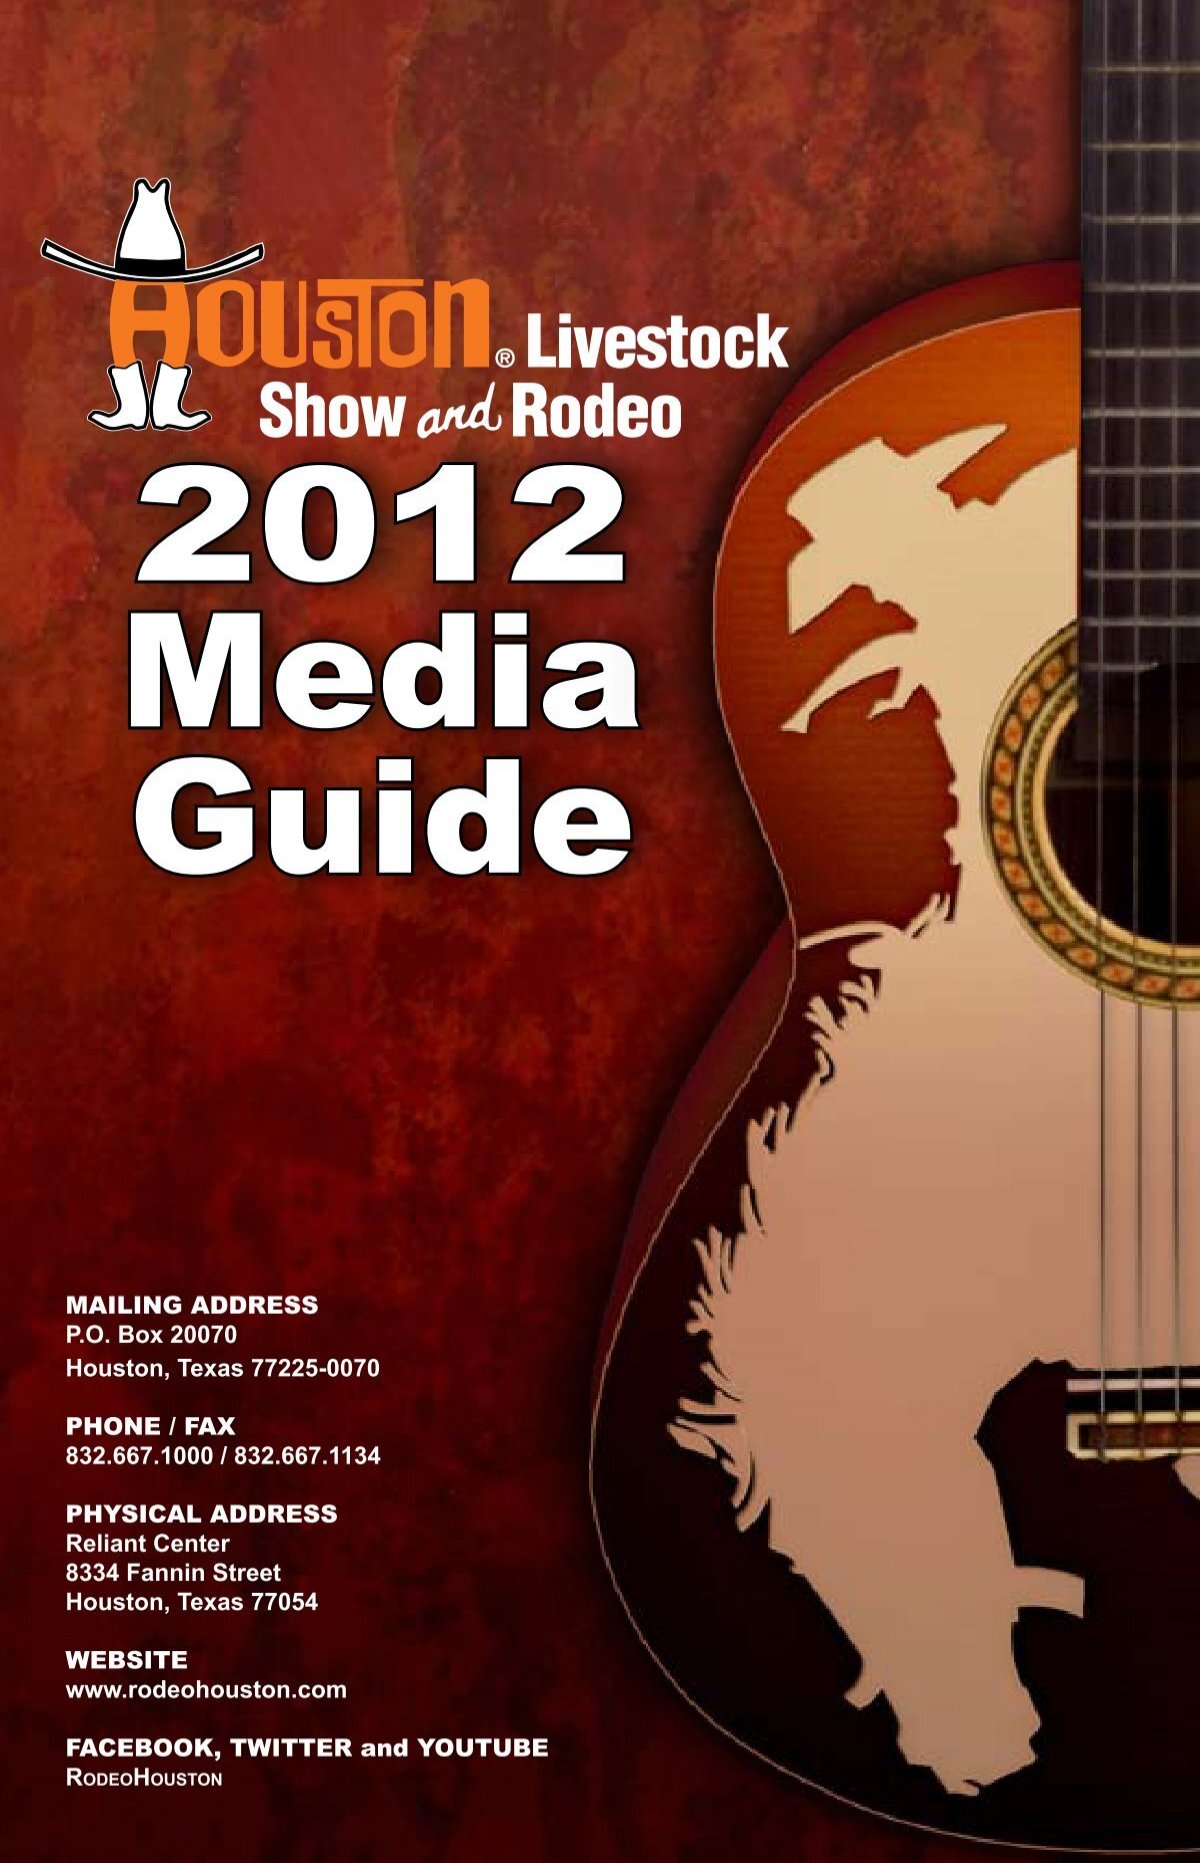 2012 Media Guide - Houston Livestock Show and Rodeo